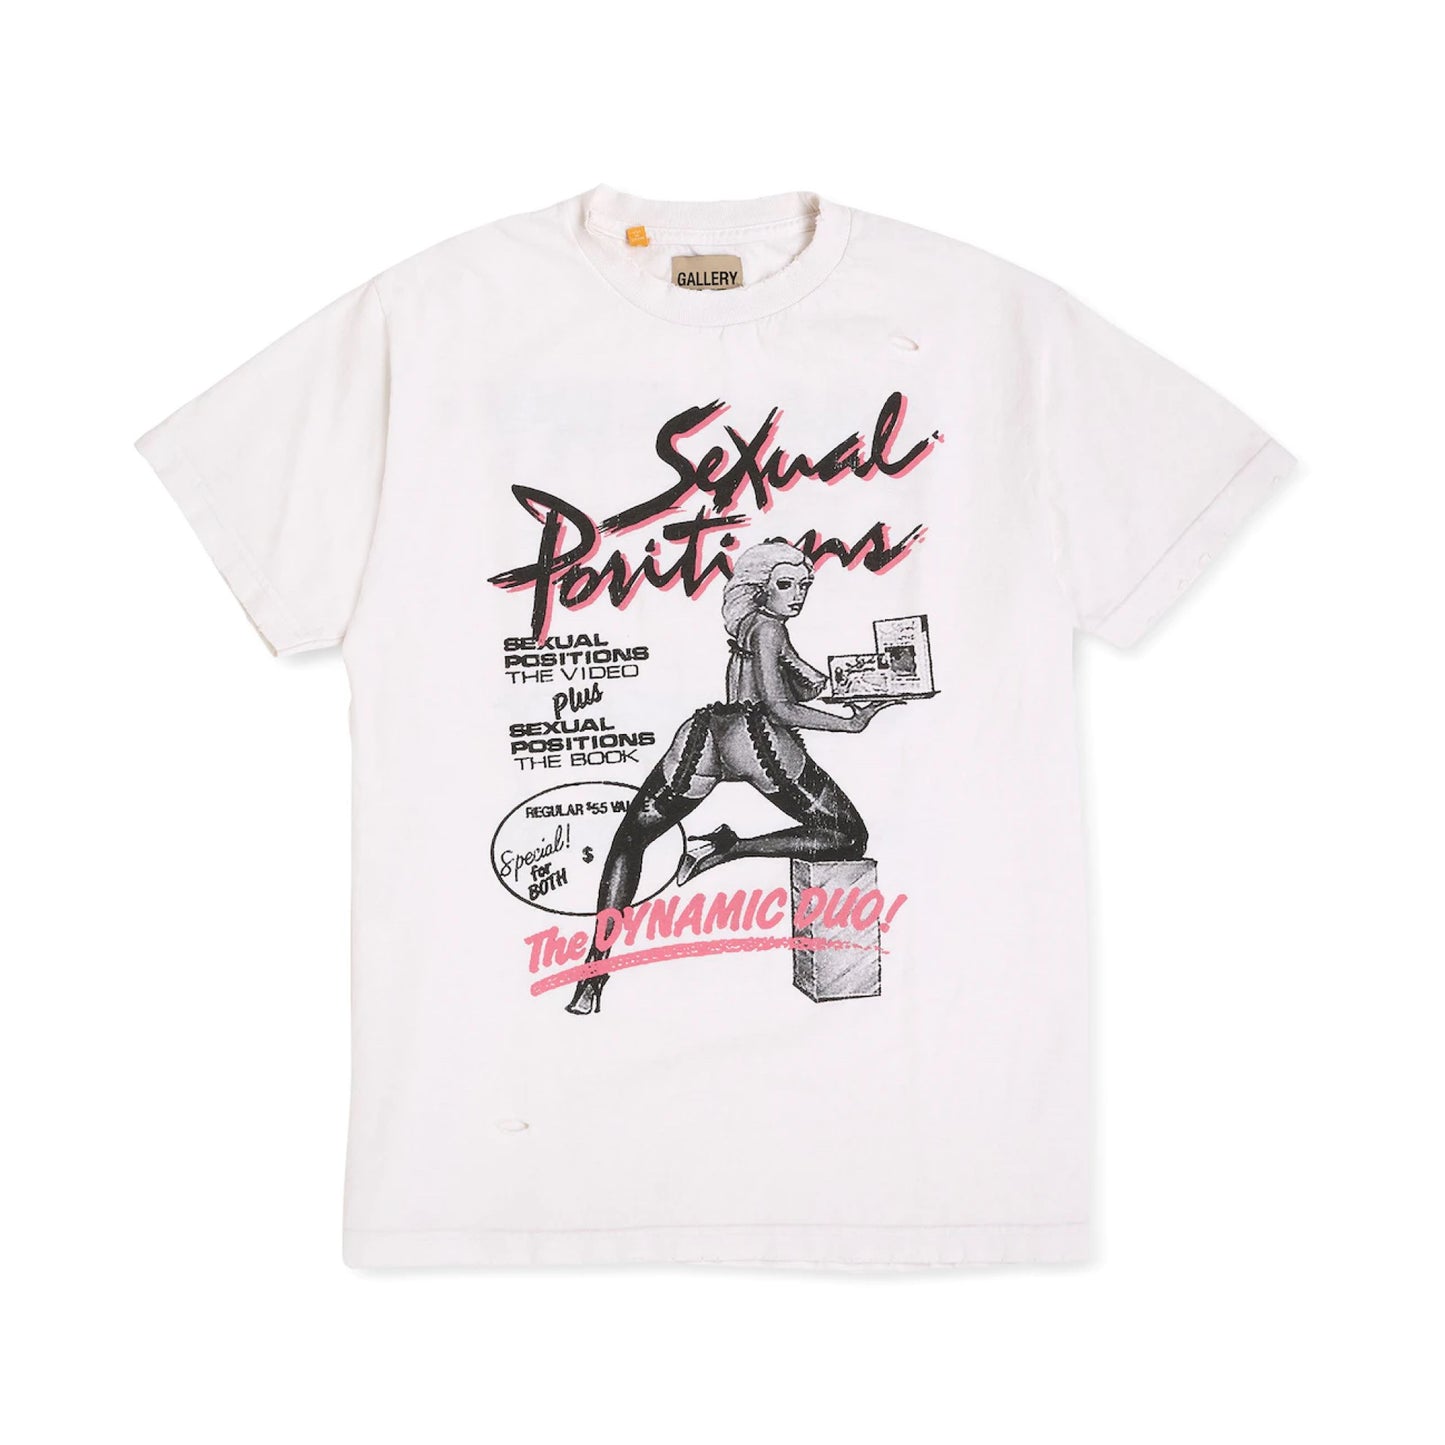 Gallery Dept. Doc Johnson Sexual Positions Tee White